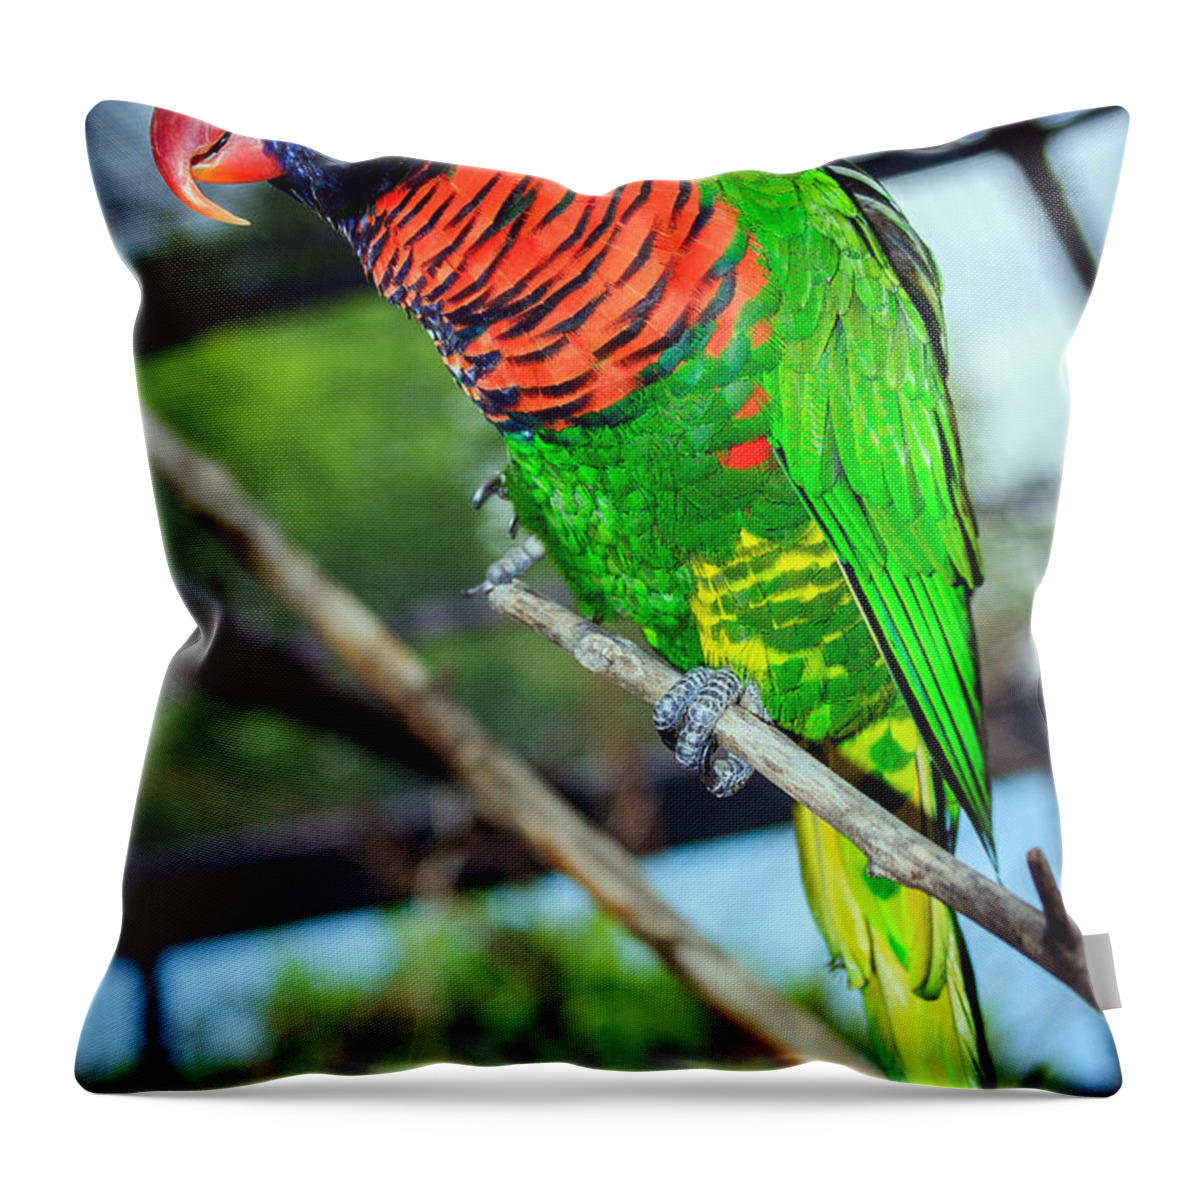 Rainbow Lory Throw Pillow featuring the photograph Rainbow Lory by Sennie Pierson